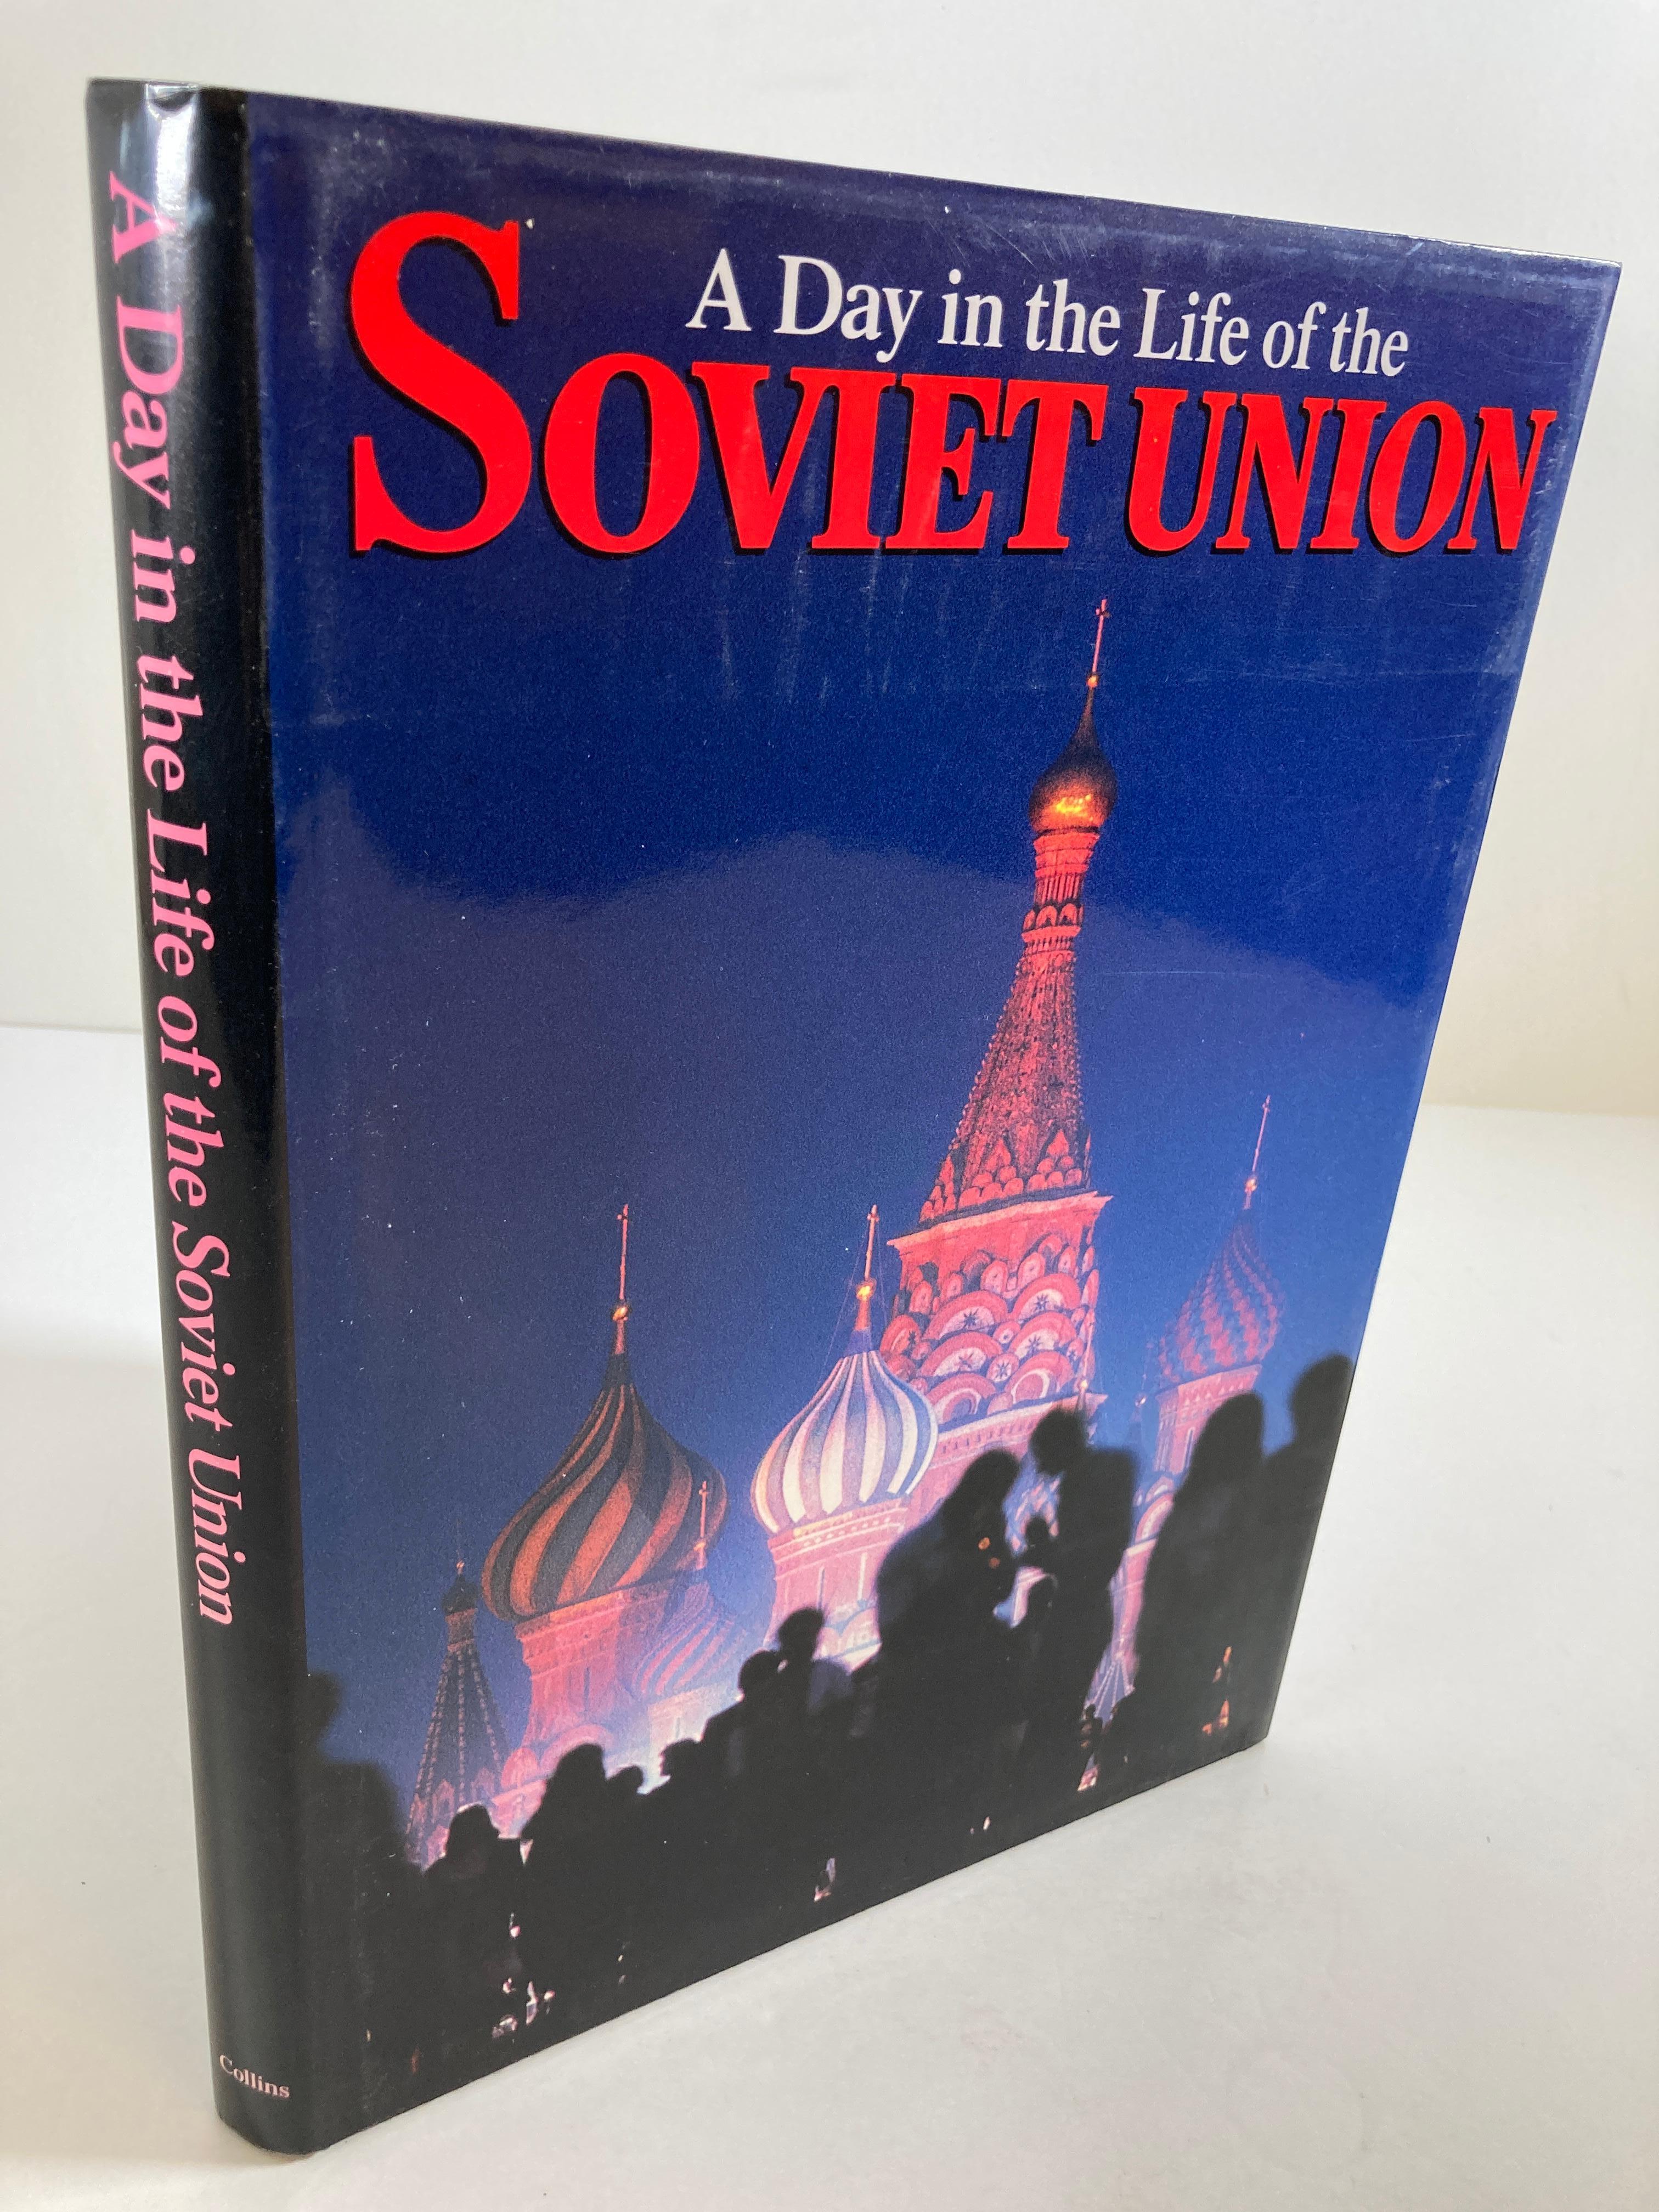 Balkan A Day in the Life of the Soviet Union Book by David Elliot Cohen Hardcover Book For Sale